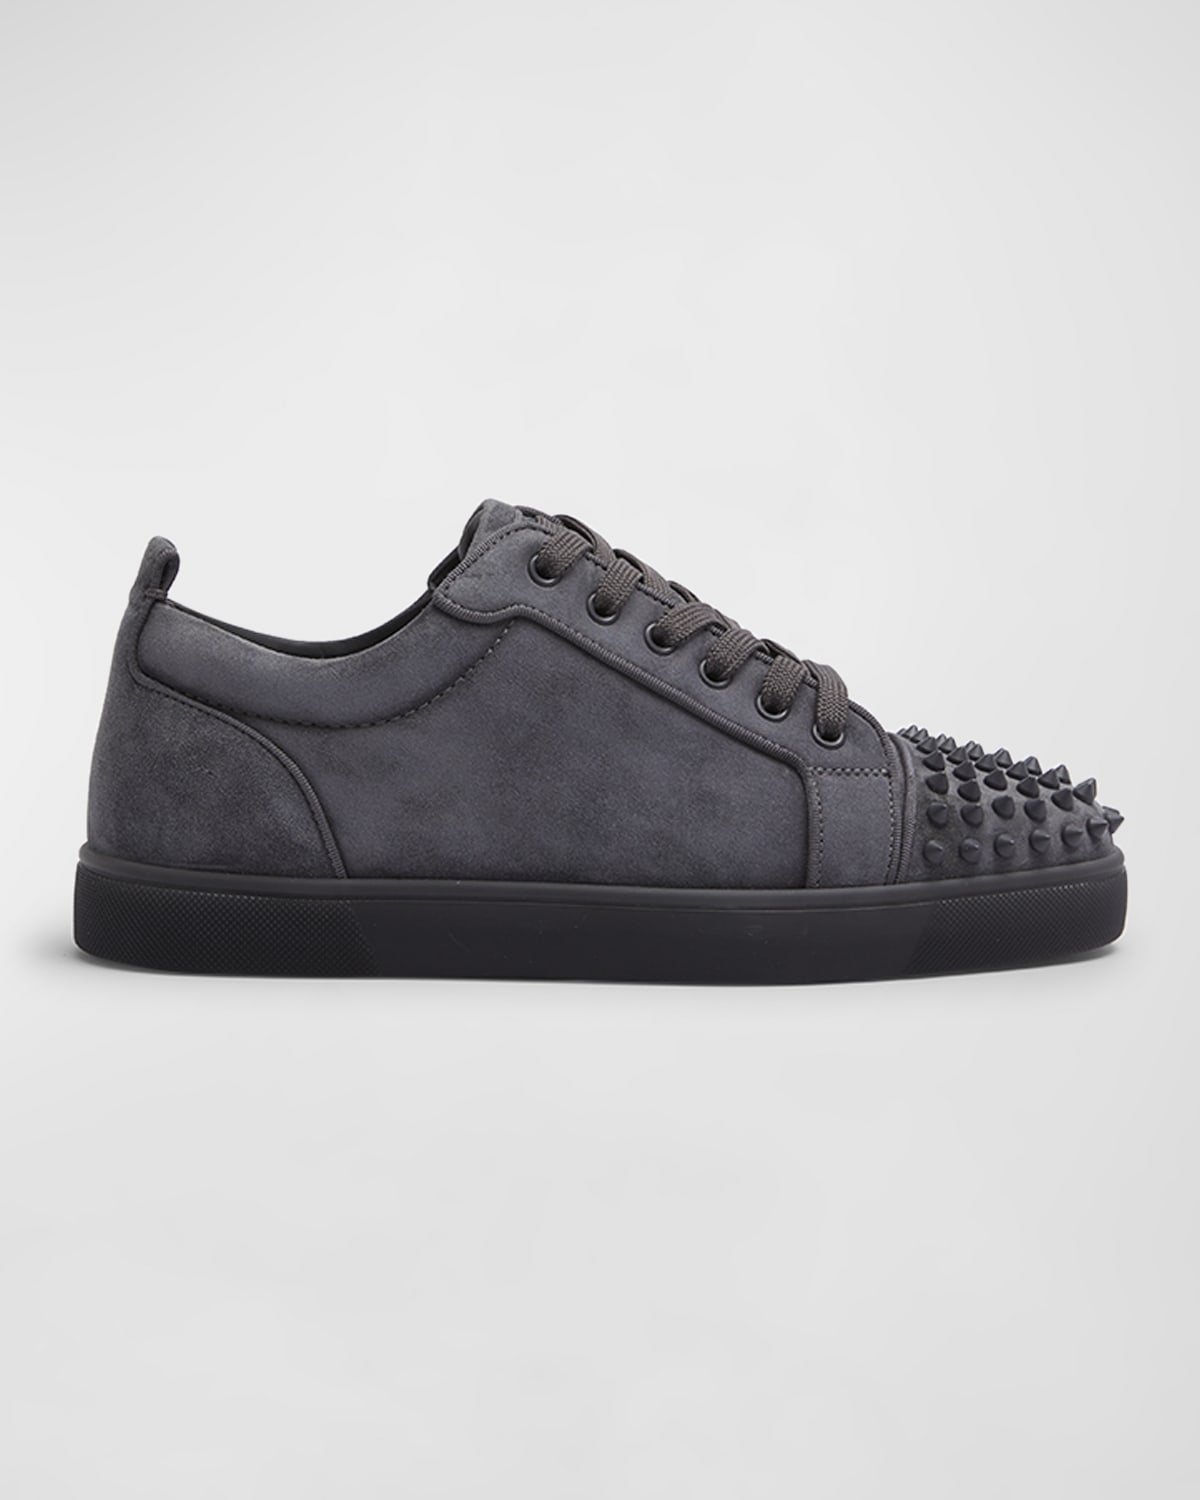 Louis Junior Spikes - Sneakers - Veau velours - Smoky - Christian